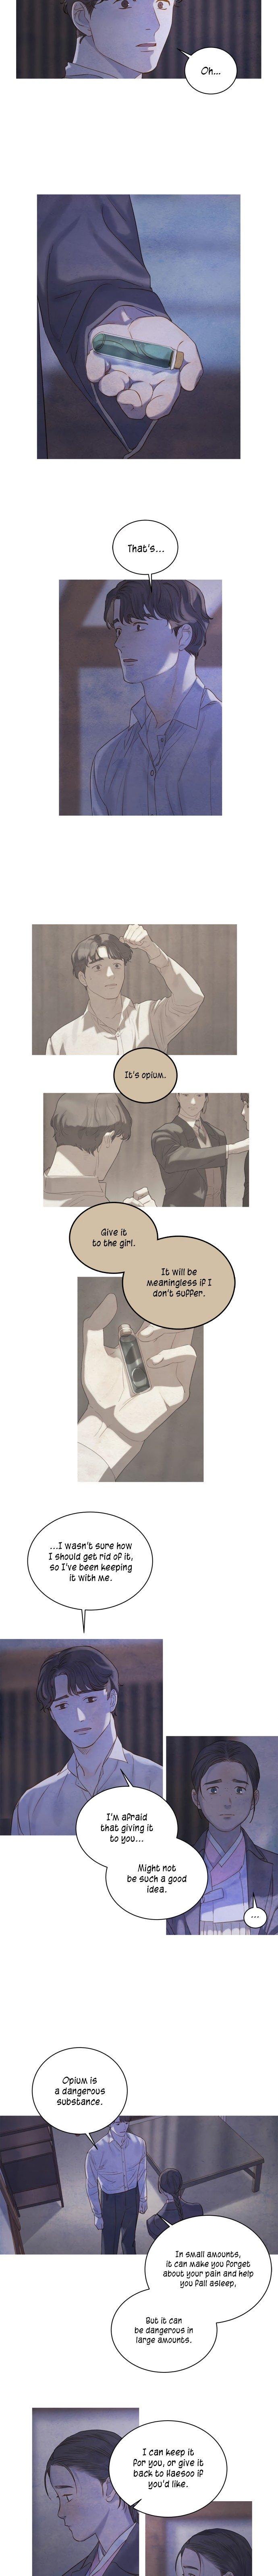 Gorae Byul - The Gyeongseong Mermaid - Chapter 31 Page 9